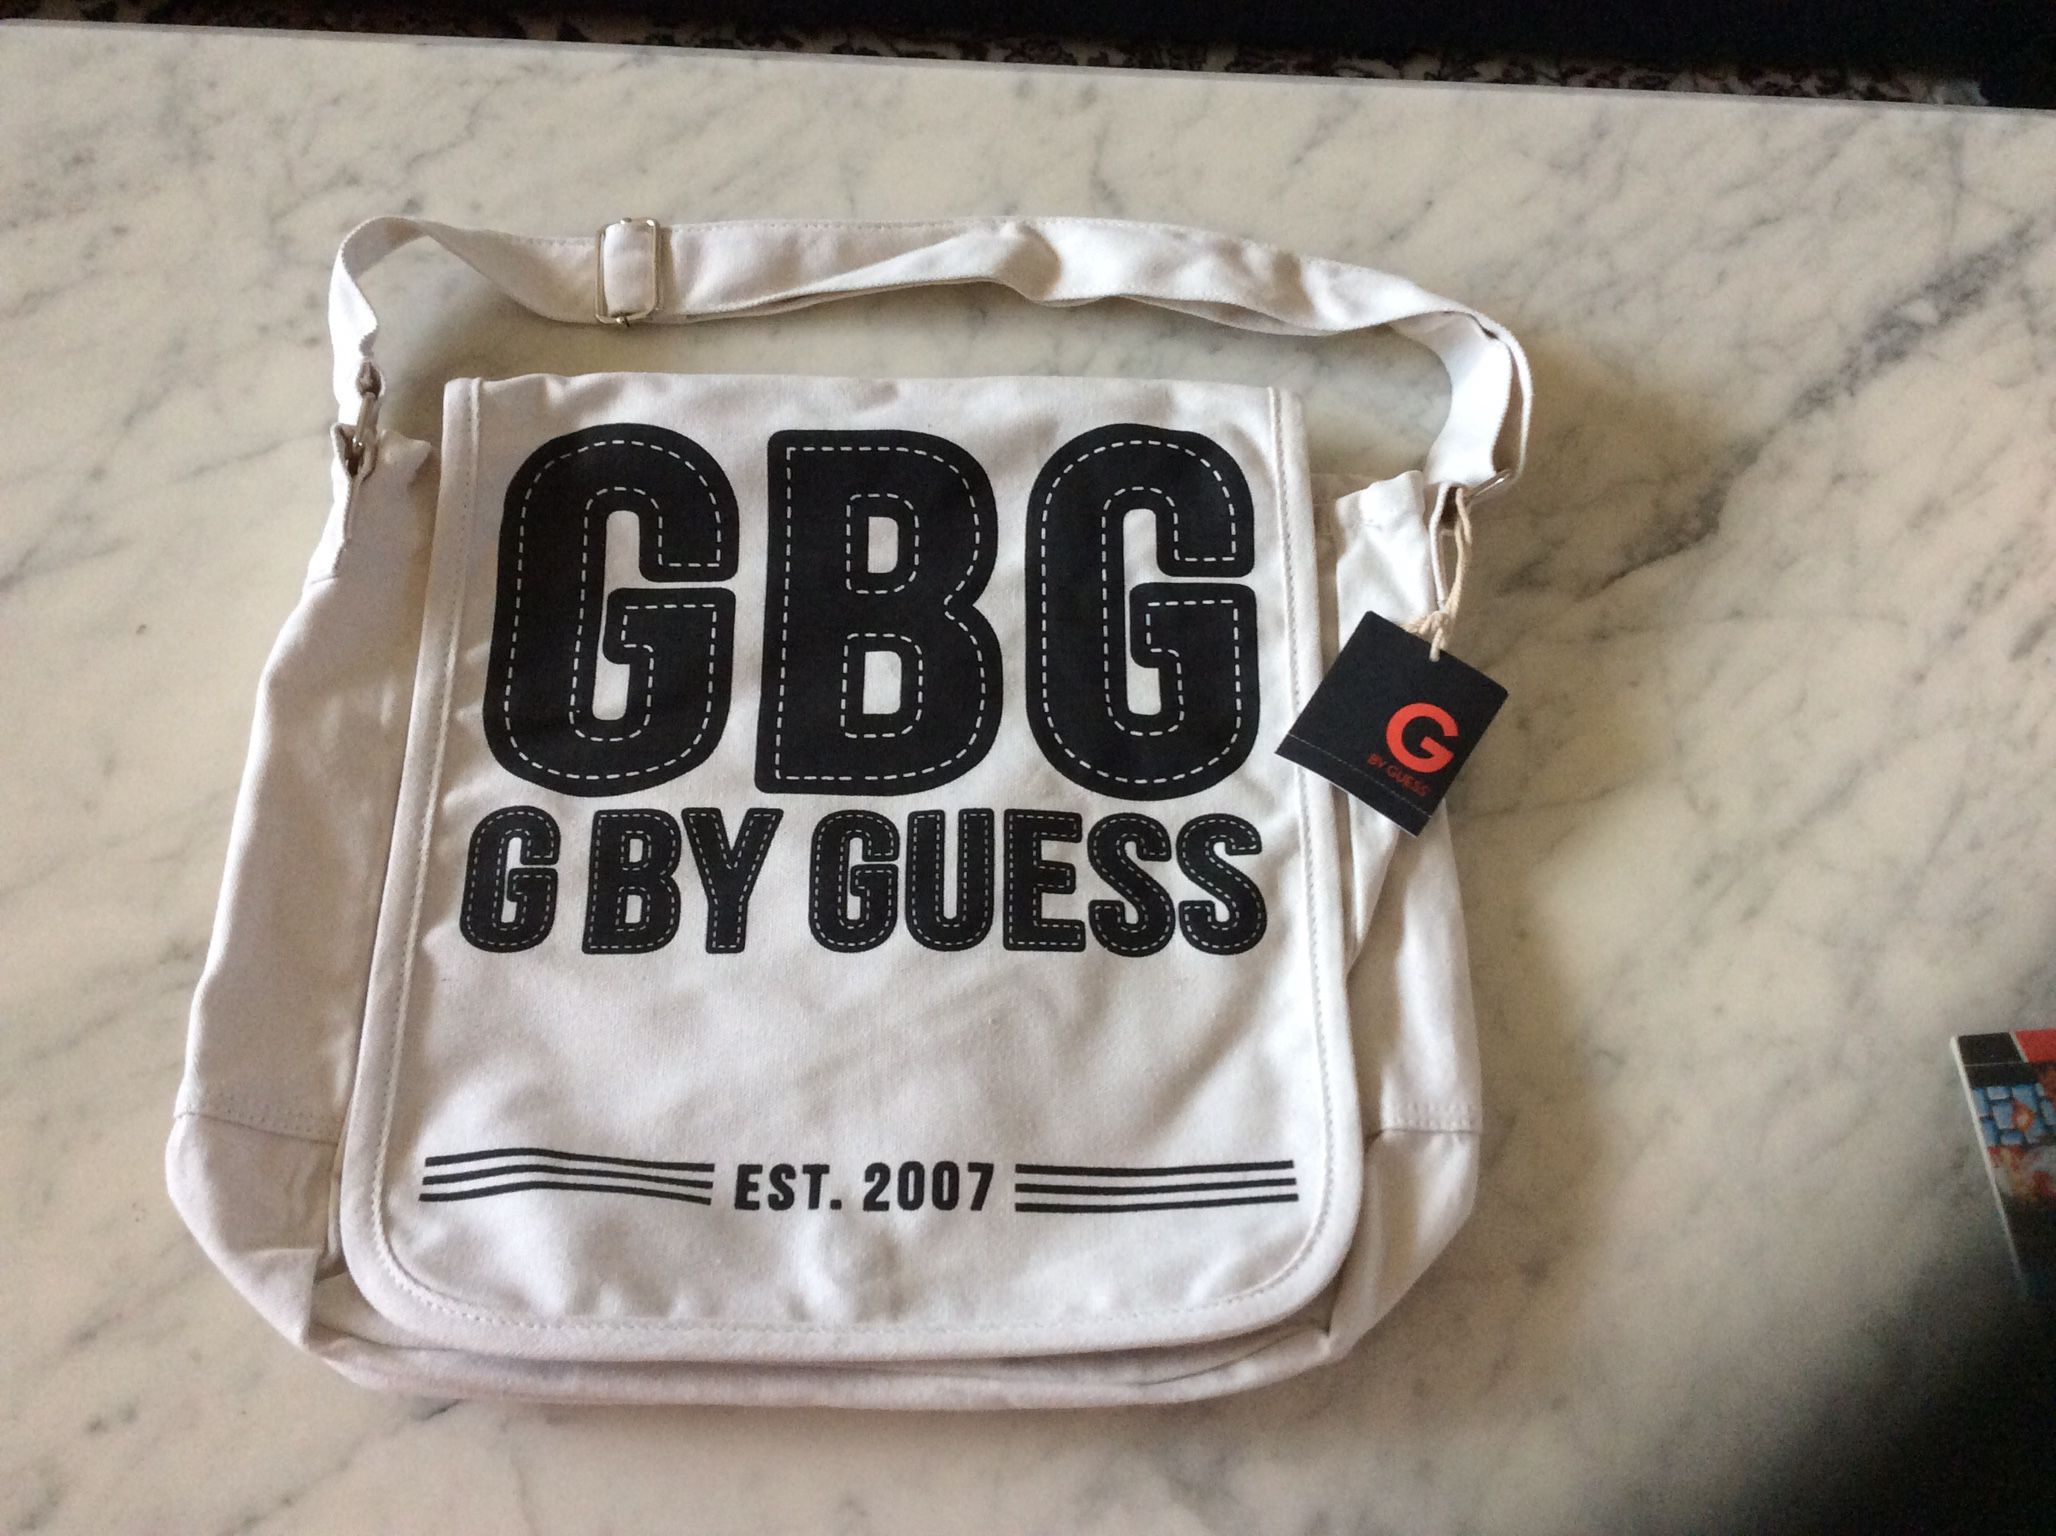 GBG By Guess Bags .